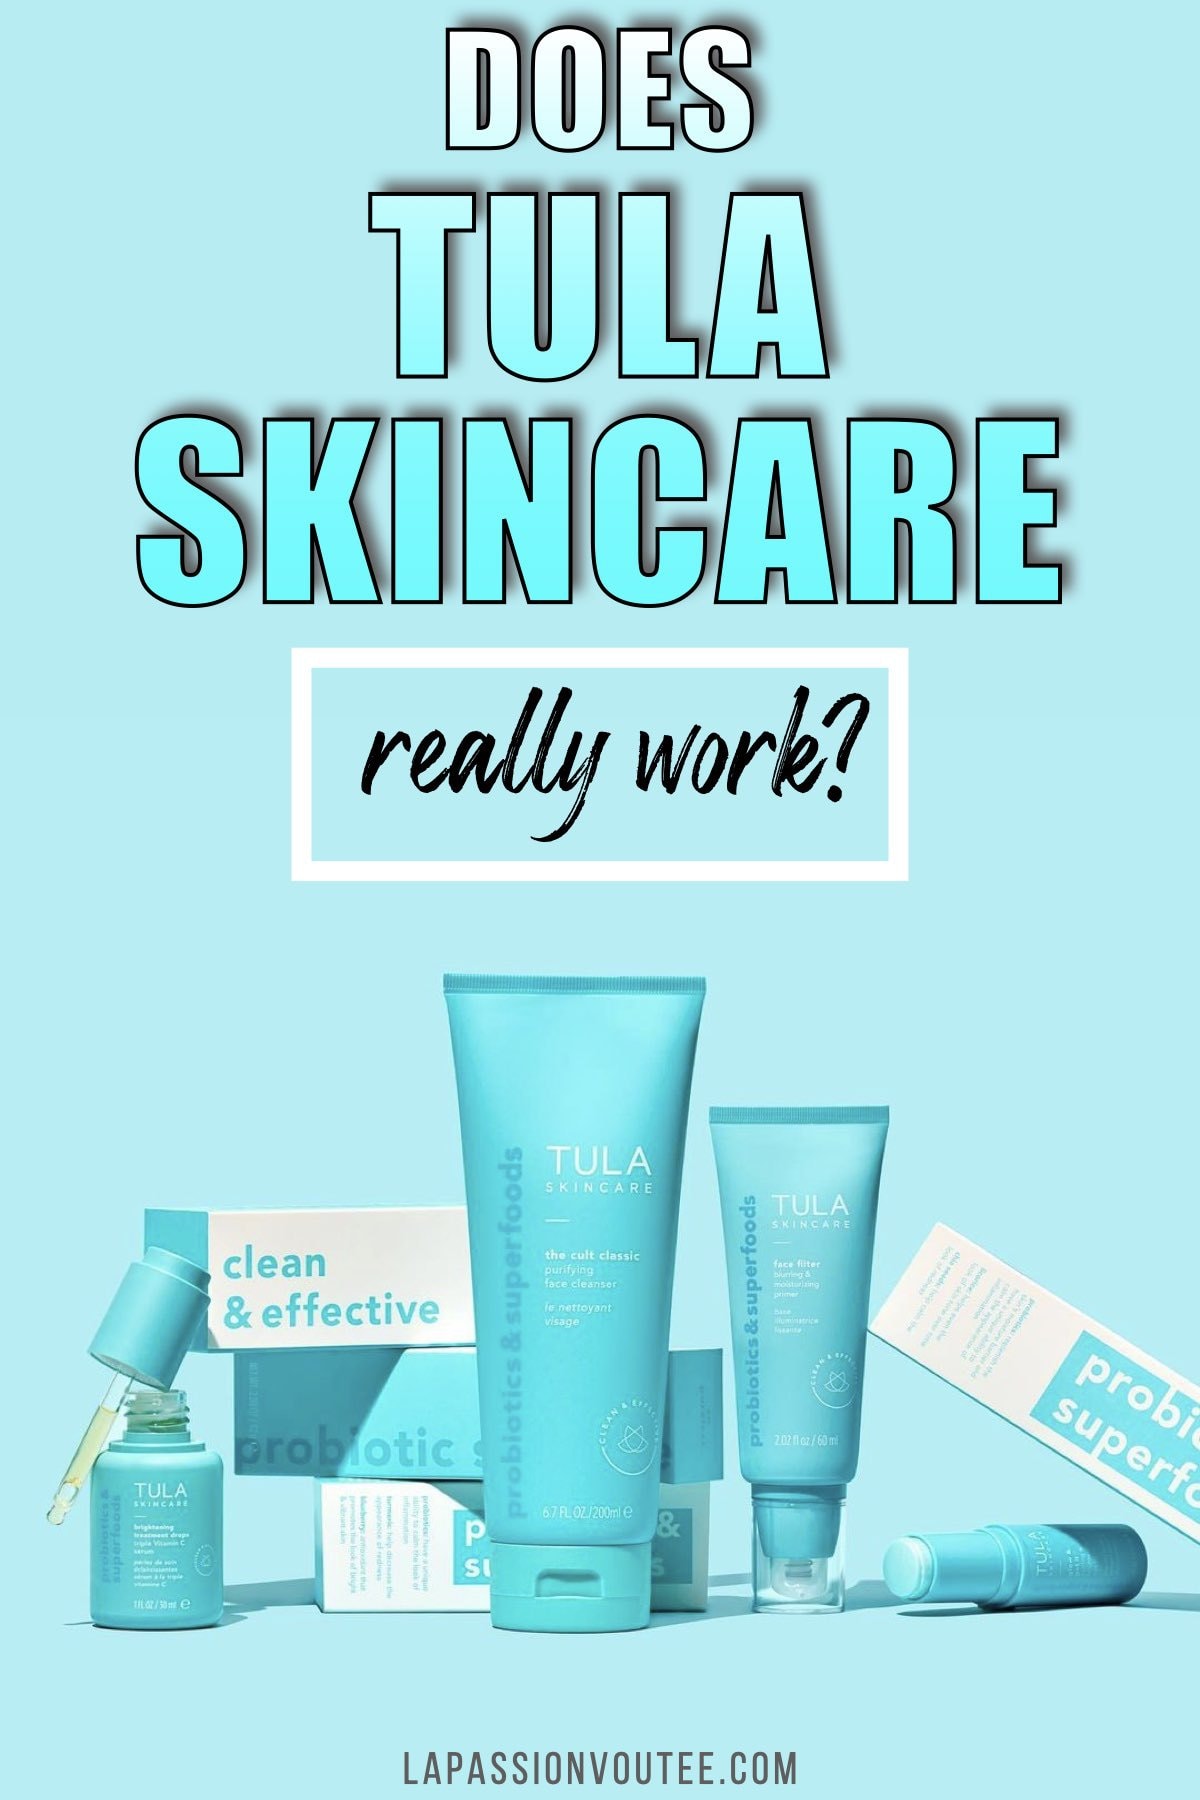 Does Tula skincare really work? Curious to know if ALL those Tula skincare reviews are real? Here's my honest thought about this vegan, cruelty-free brand and their hyped probiotics products.